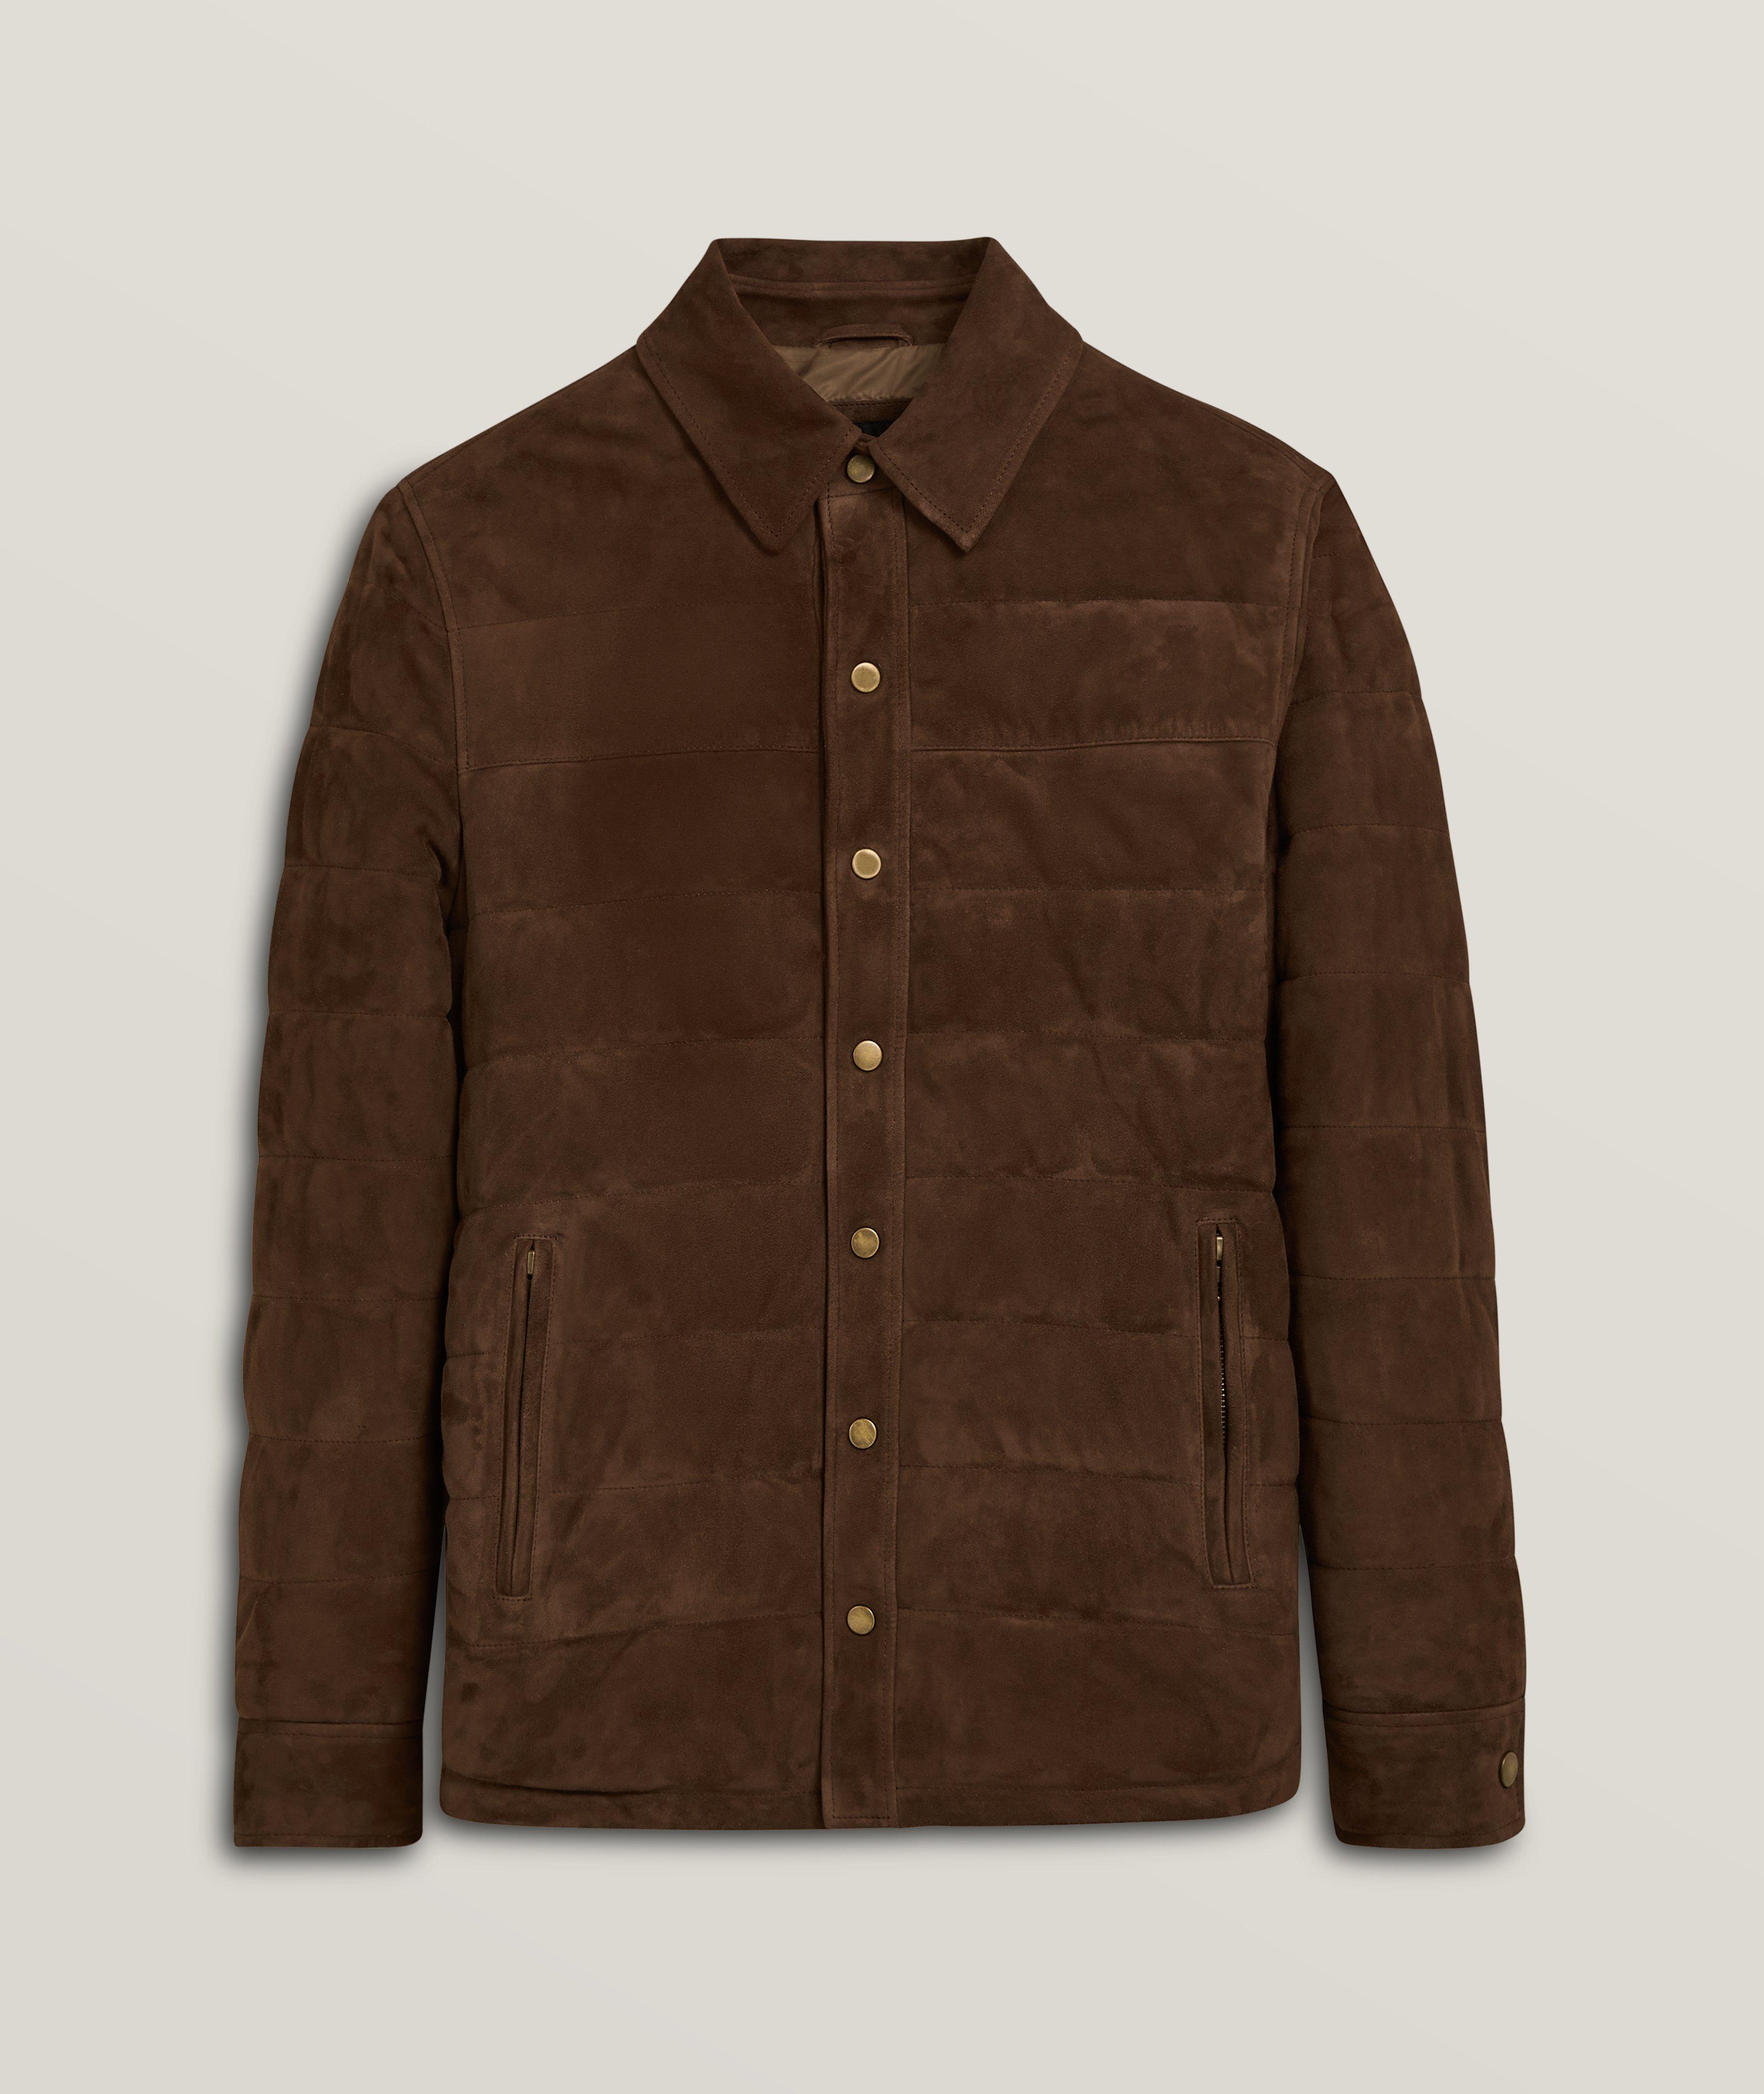 Quilted Suede Jacket image 0